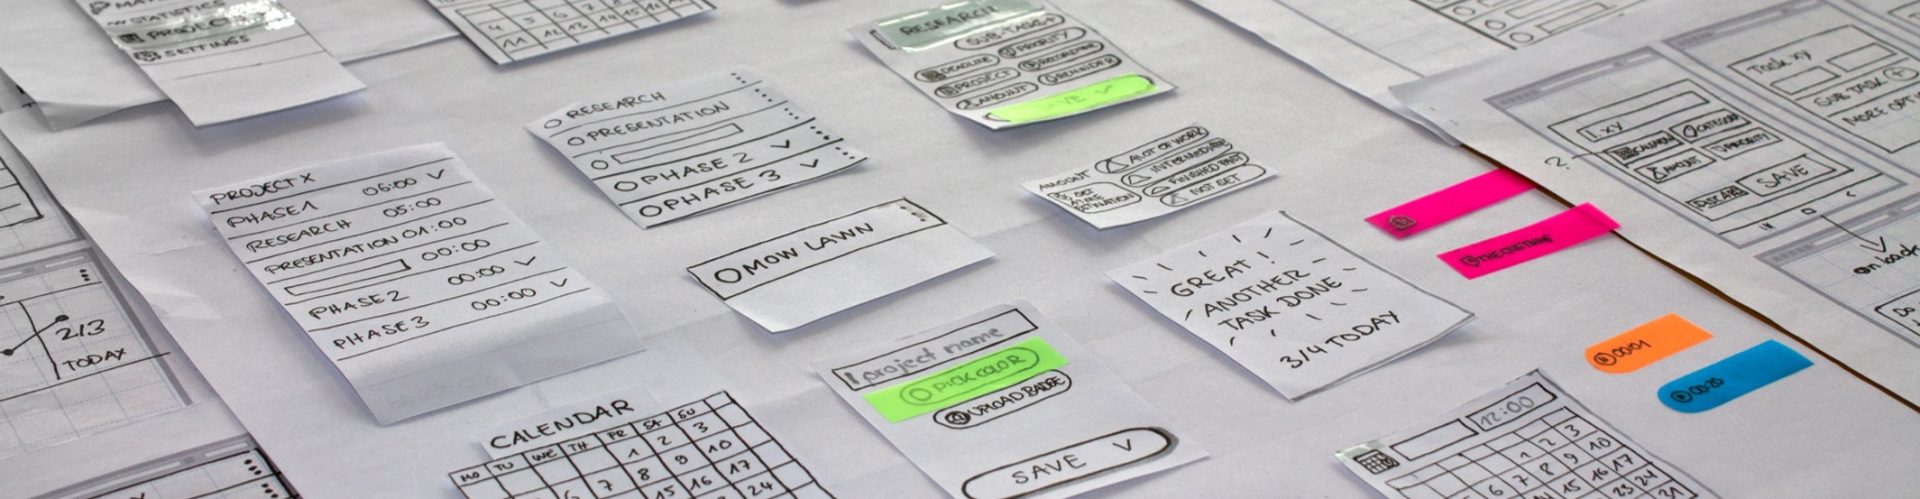 A depiction of paper prototyping for digital product design